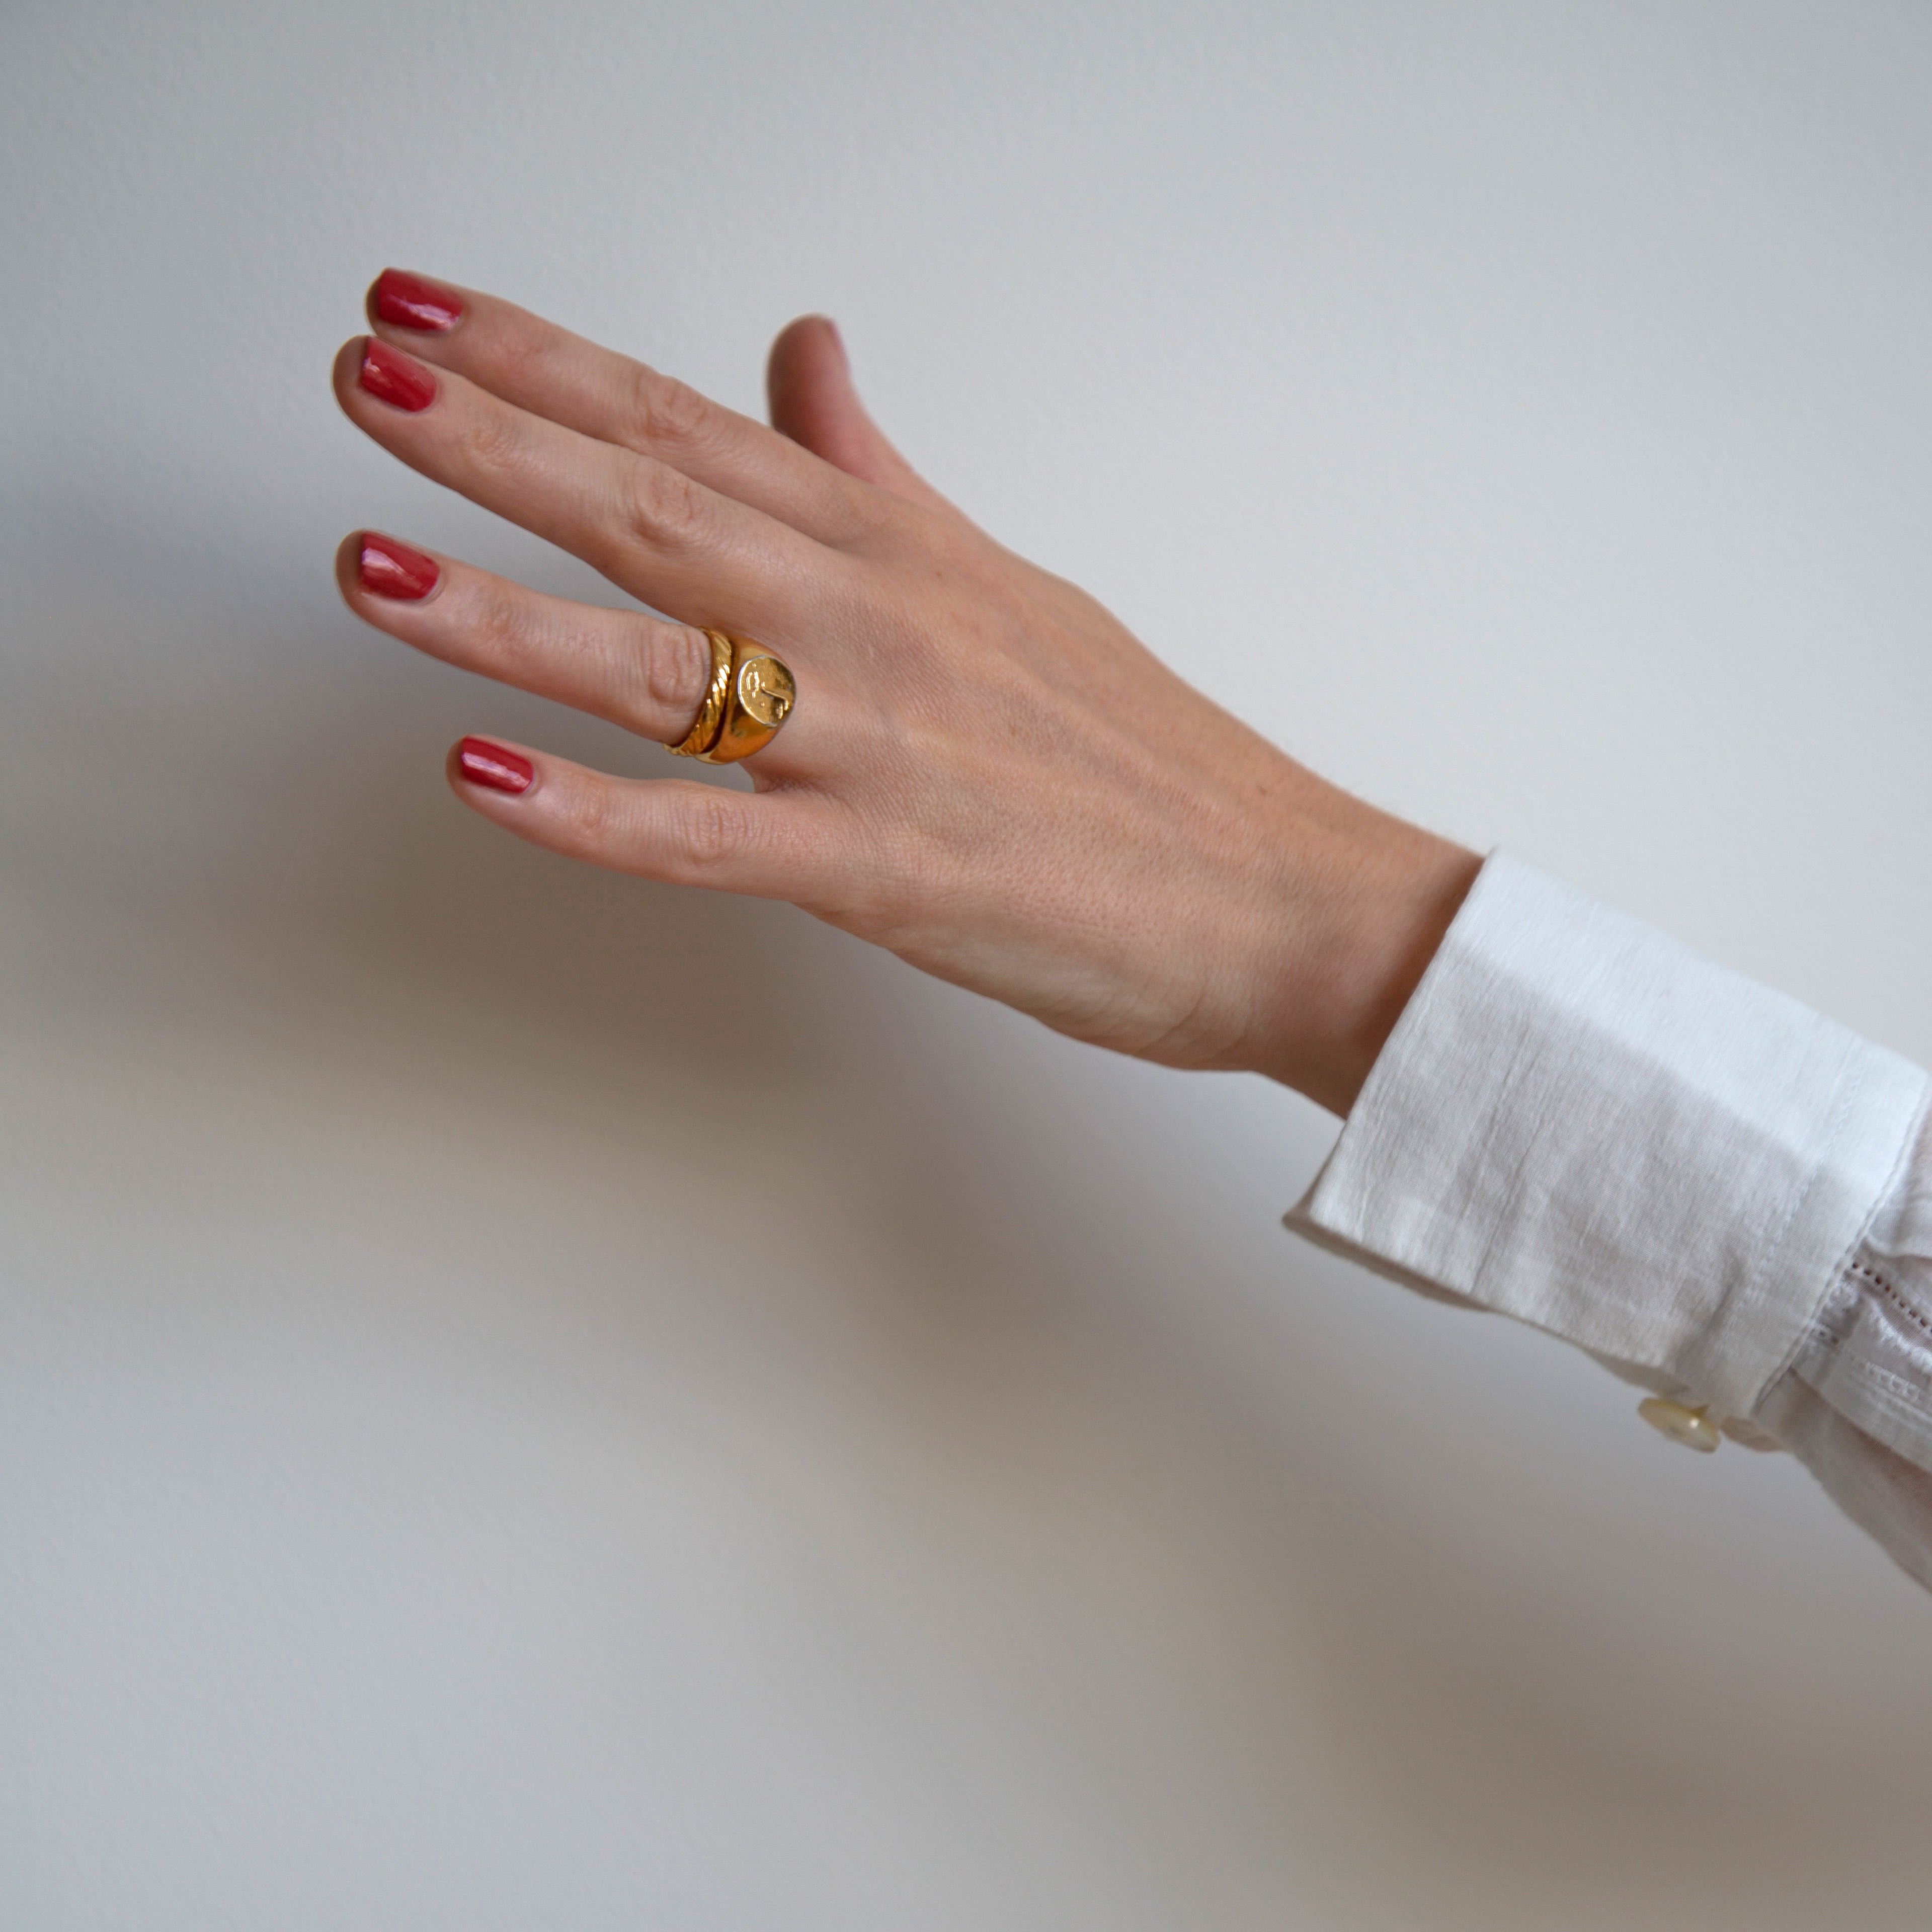 A female hand stretched out against a white backdrop wearing Tuscan Summer, a burnt orange red shade of nail polish by Paint Nail Lacquer